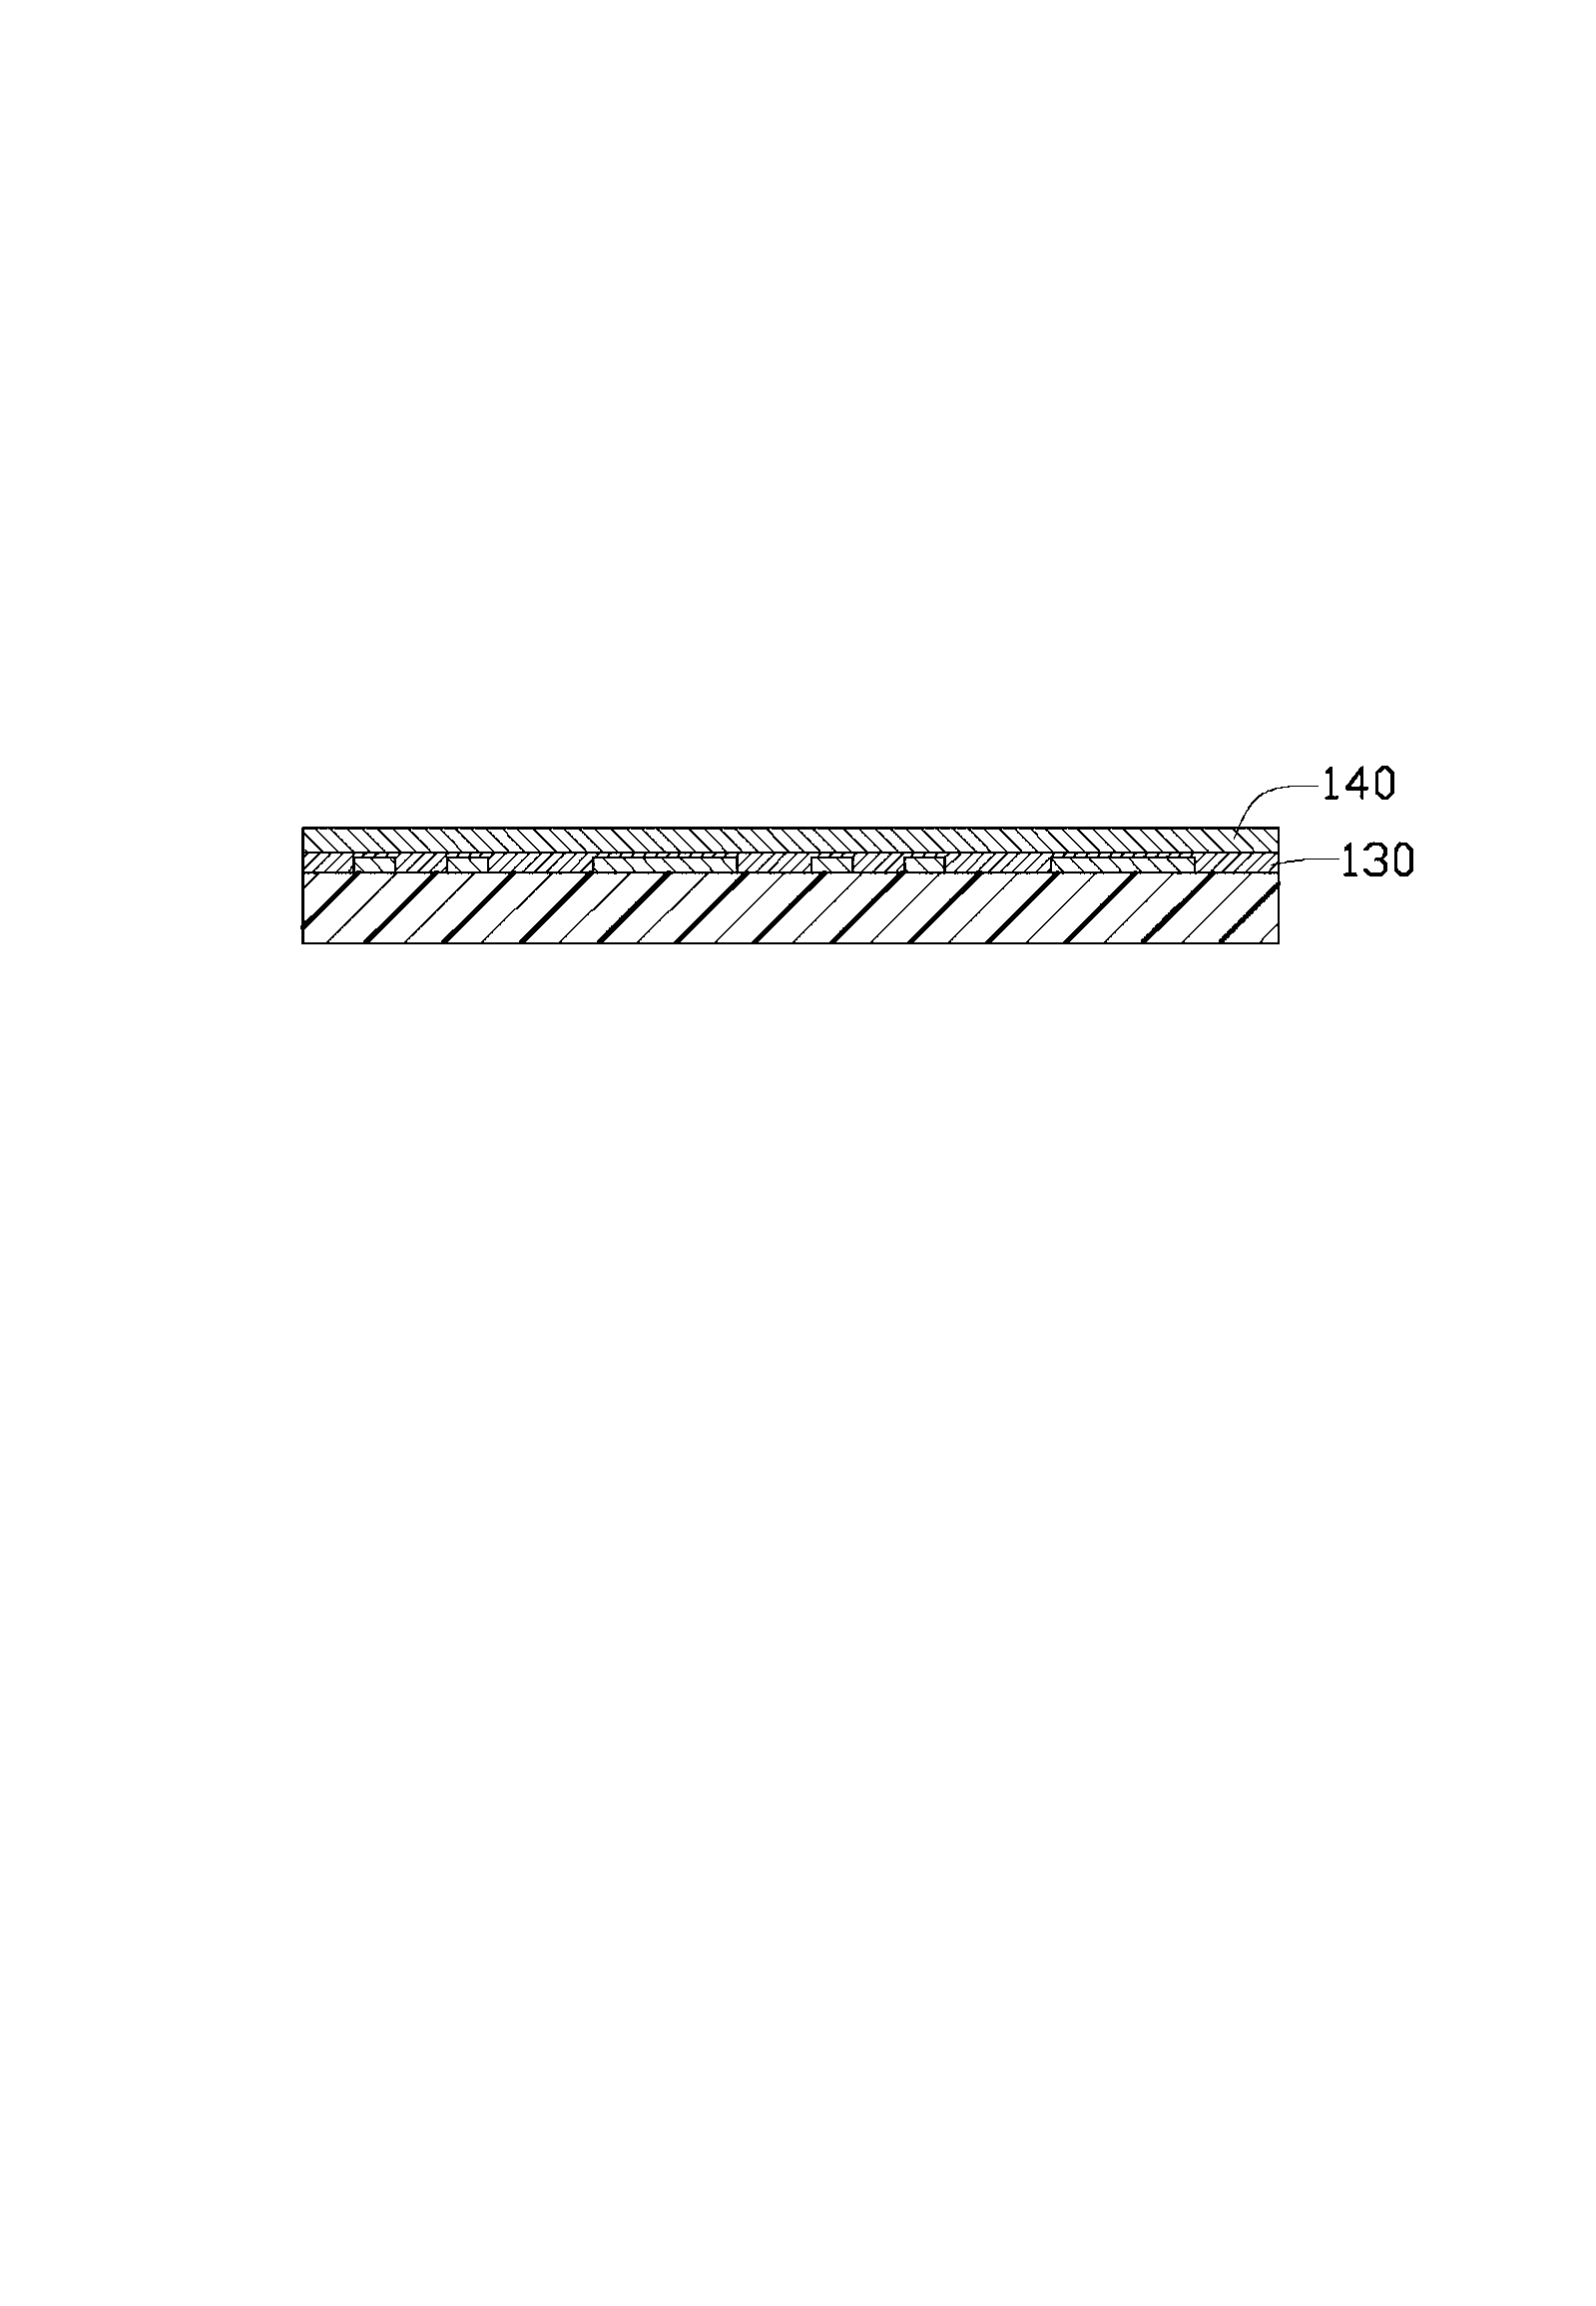 Manufacturing method for circuit board